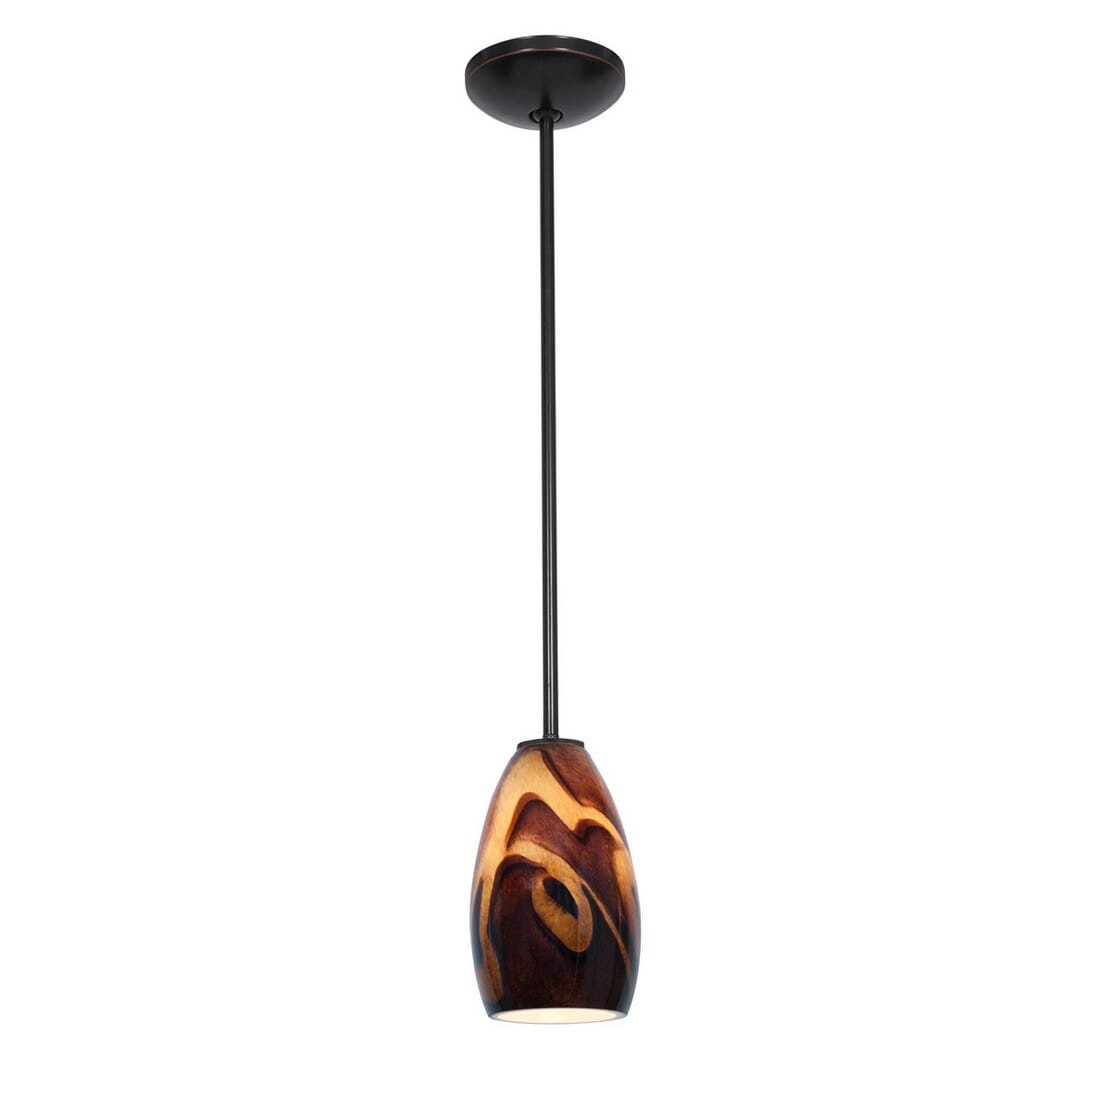 Access Champagne Pendant Light in Oil Rubbed Bronze -  Access Lighting, 28012-3R-ORB/ICA